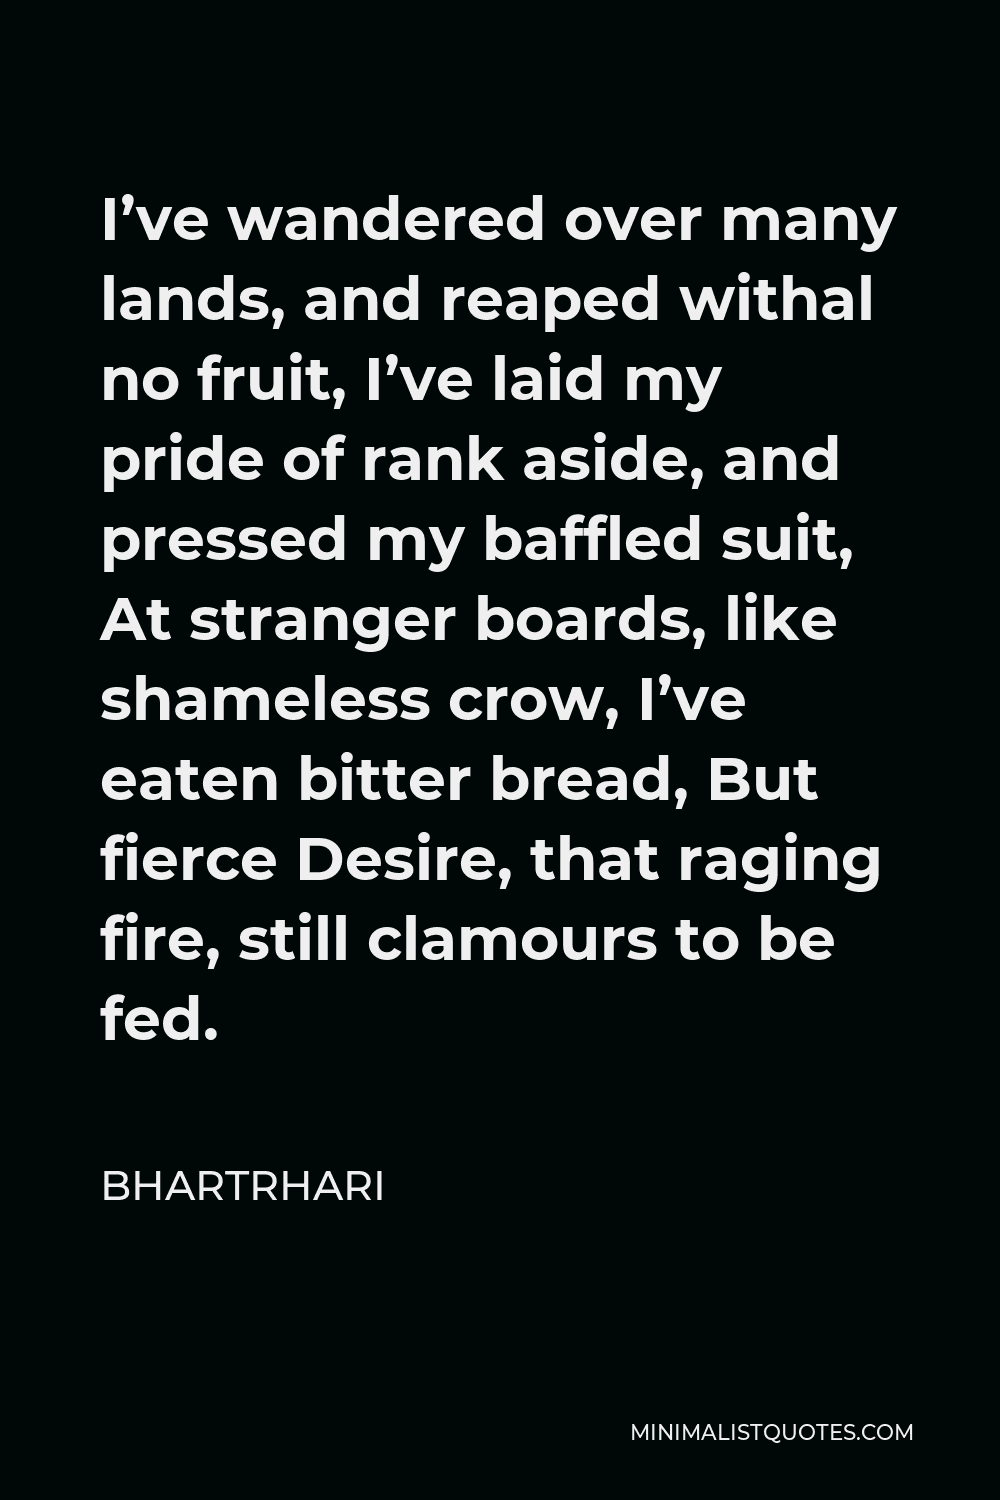 Bhartrhari Quote - I’ve wandered over many lands, and reaped withal no fruit, I’ve laid my pride of rank aside, and pressed my baffled suit, At stranger boards, like shameless crow, I’ve eaten bitter bread, But fierce Desire, that raging fire, still clamours to be fed.